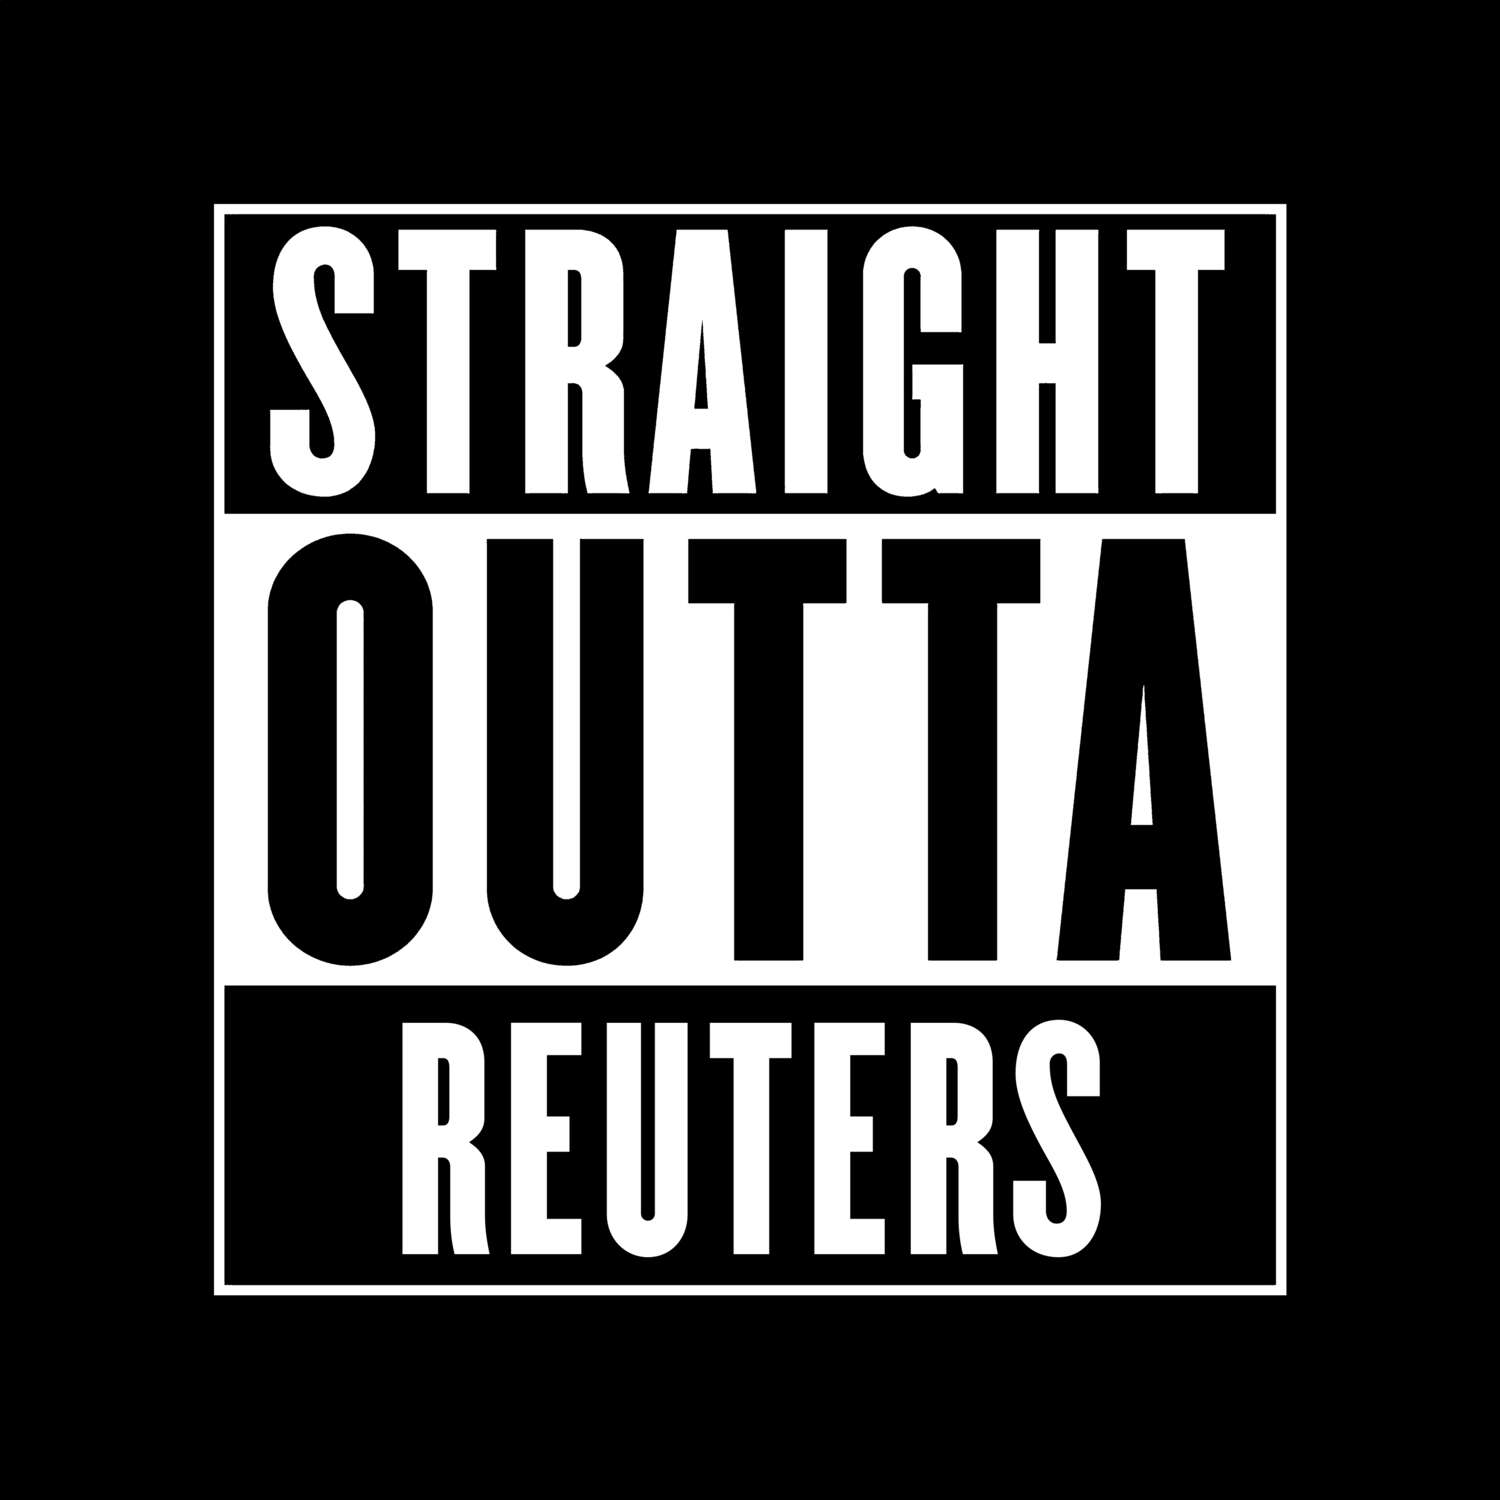 Reuters T-Shirt »Straight Outta«